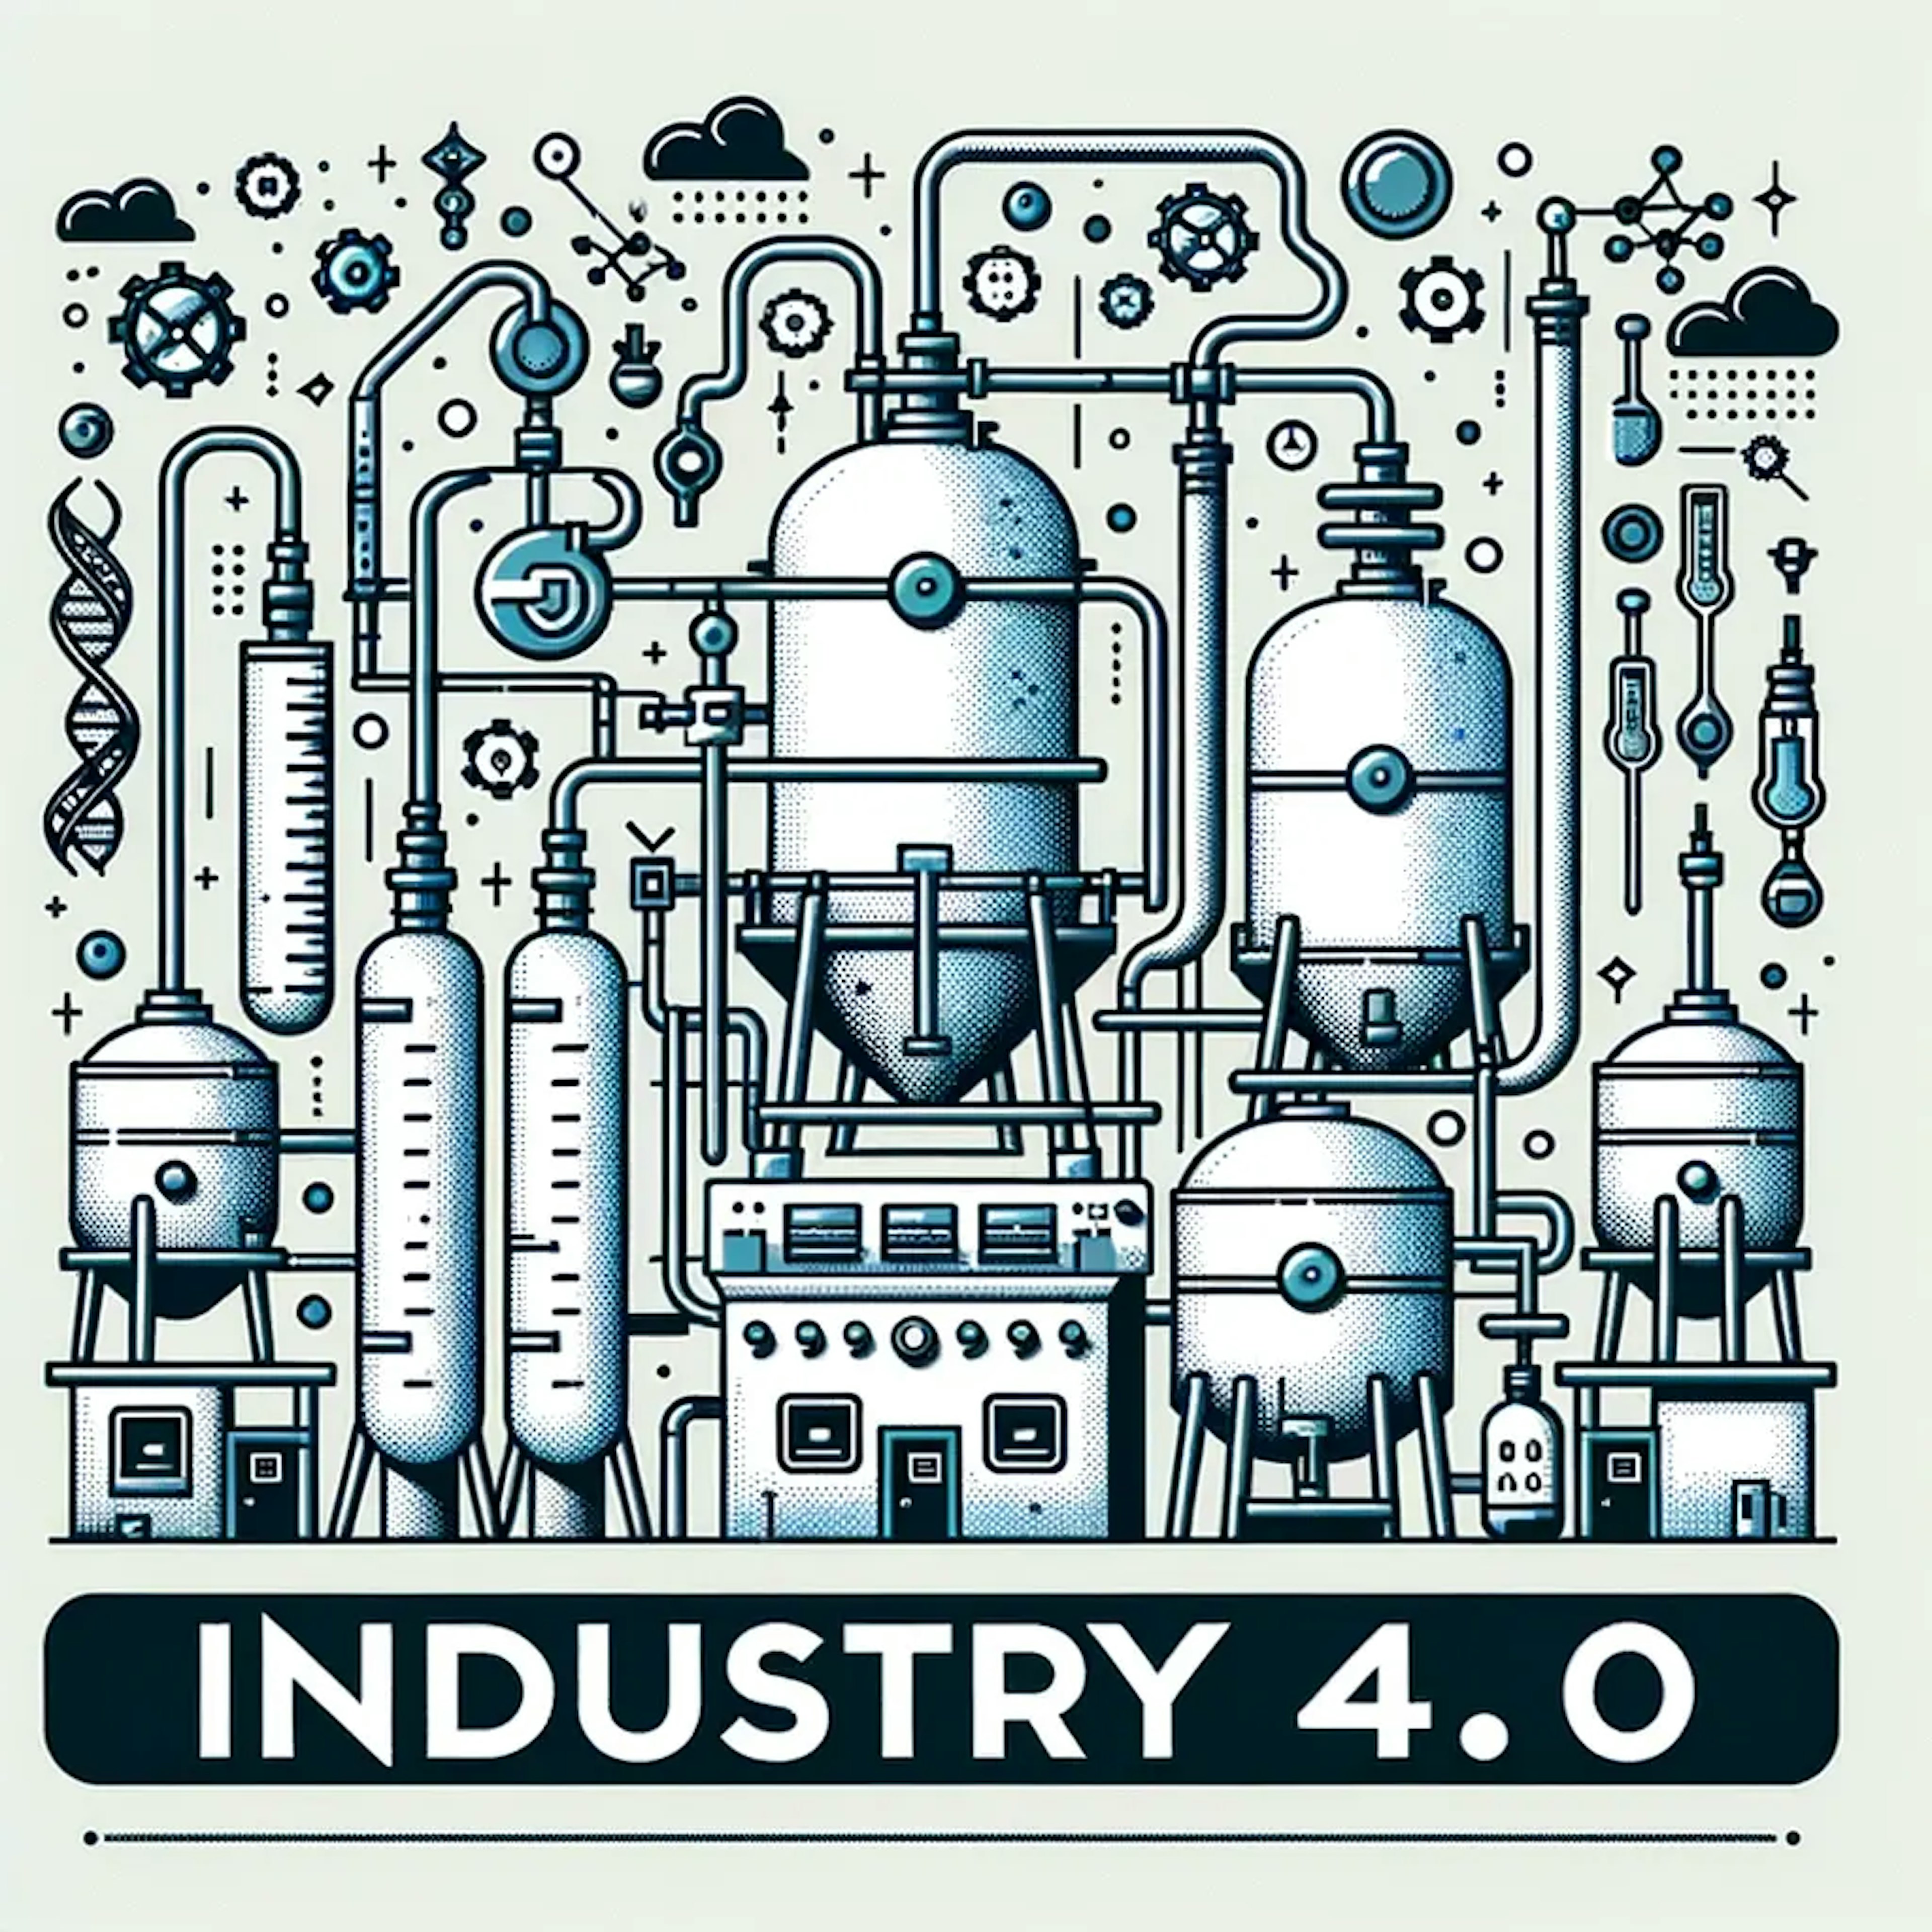 How can an EBR help with the implementation of industry 4.0 aims?